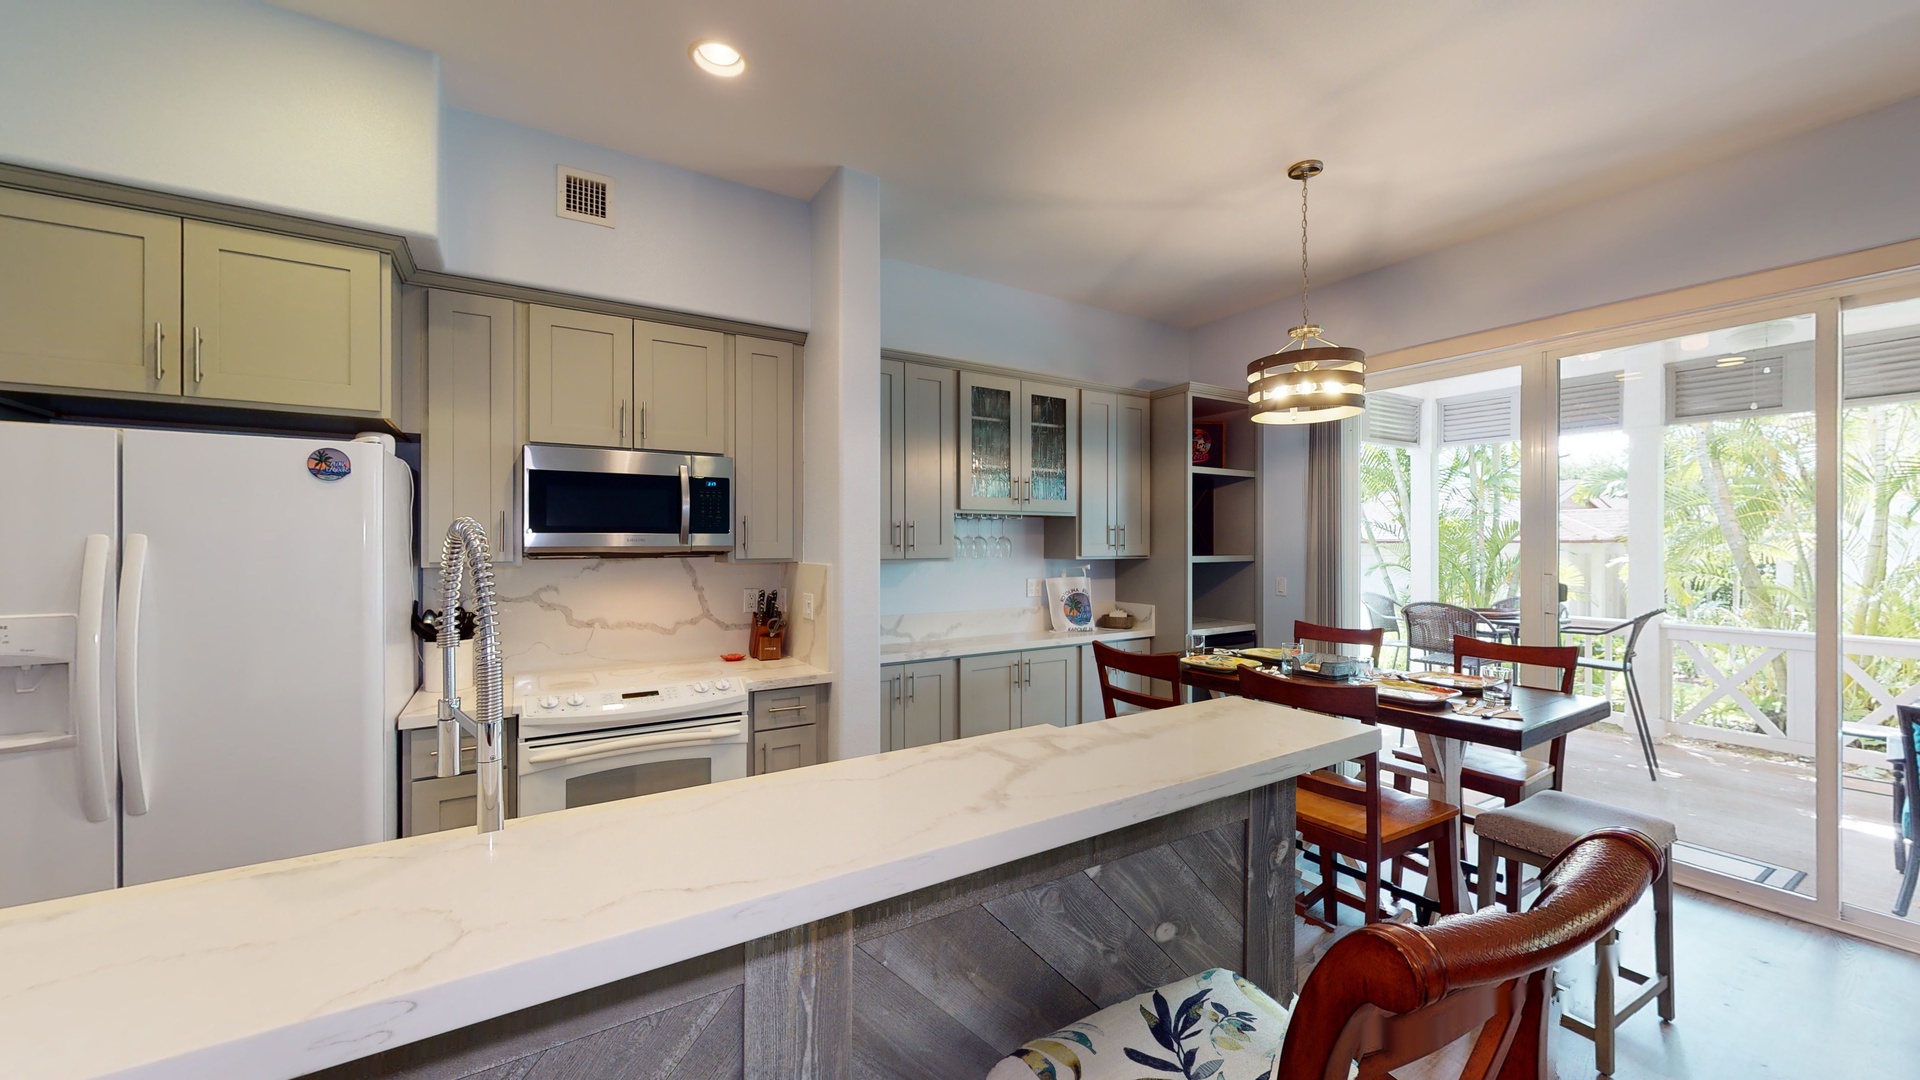 Kapolei Vacation Rentals, Coconut Plantation 1214-2 Aloha Lagoons - The spacious kitchen with bar seating has all your needs for a relaxing vacation.